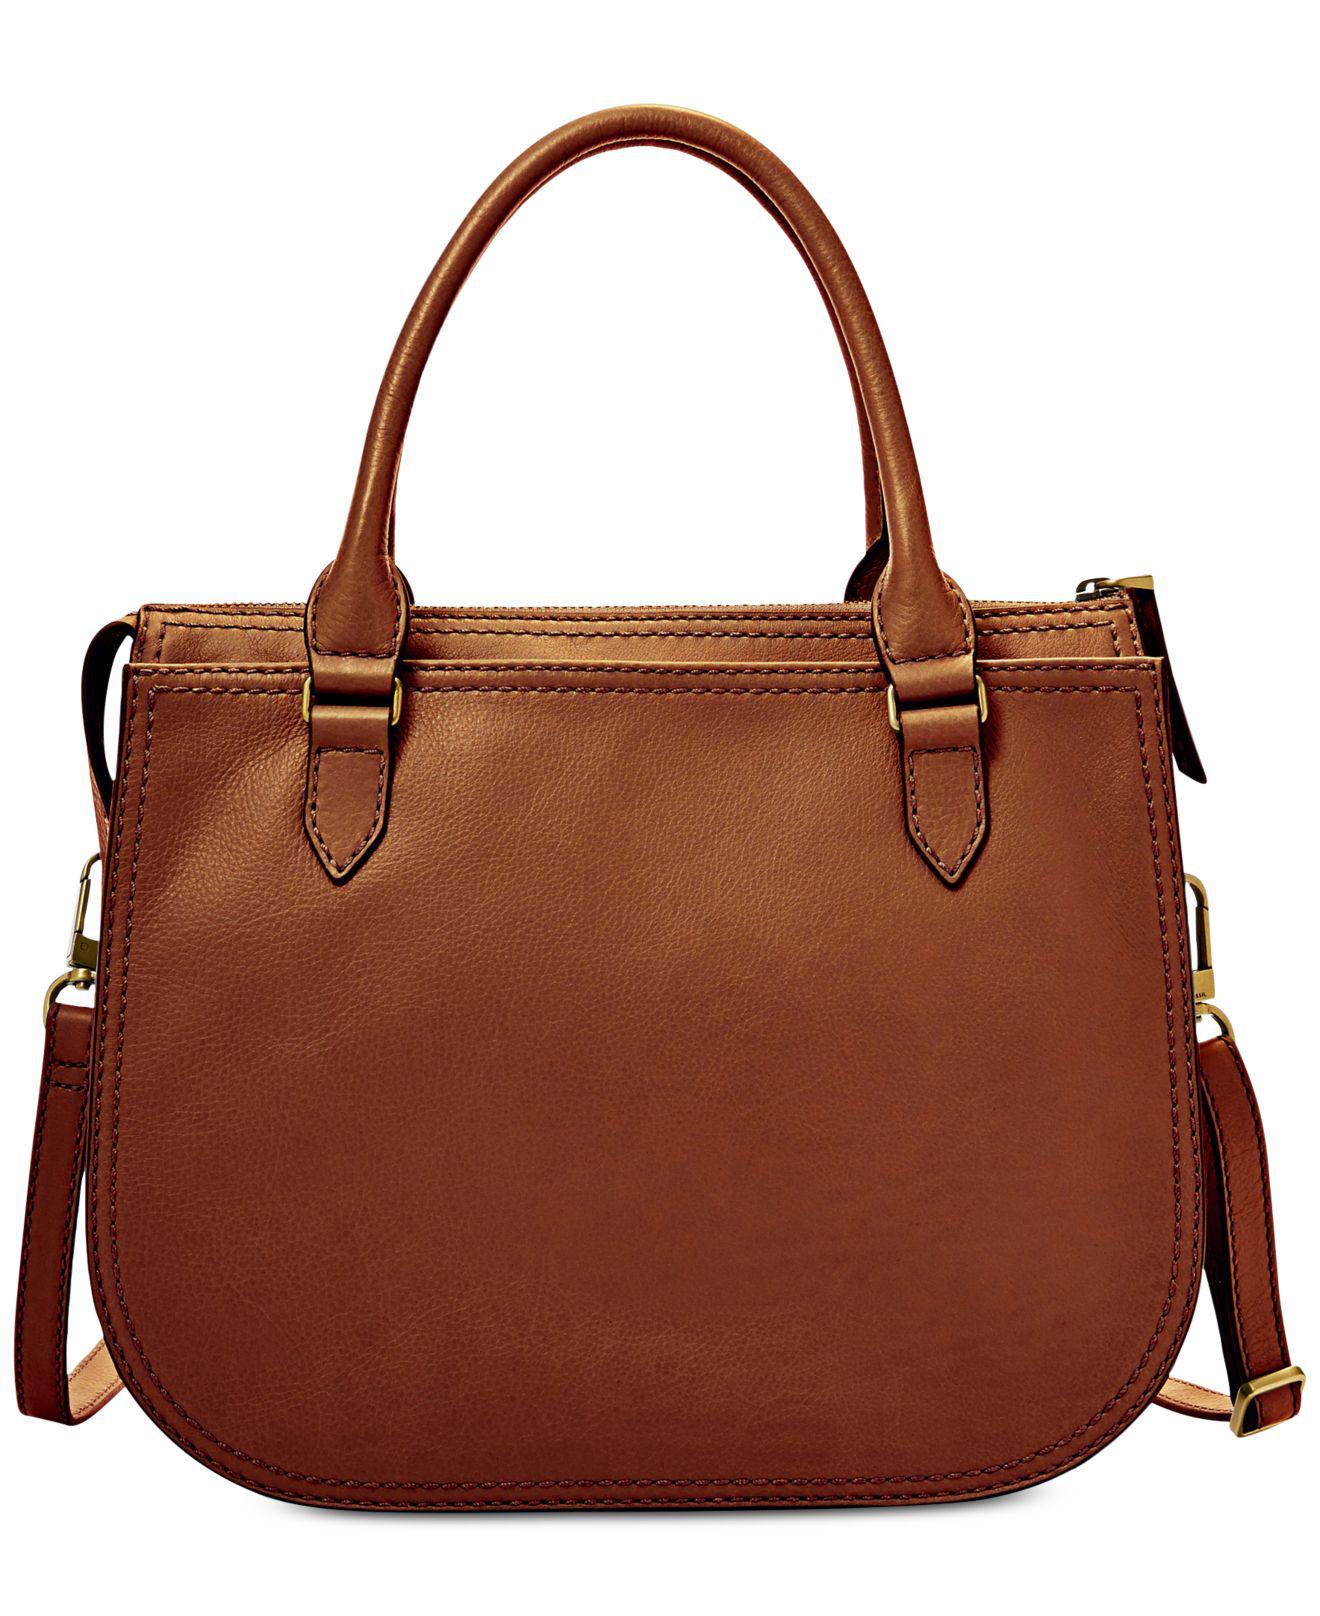 Fossil Ryder Satchel in Brown - Lyst